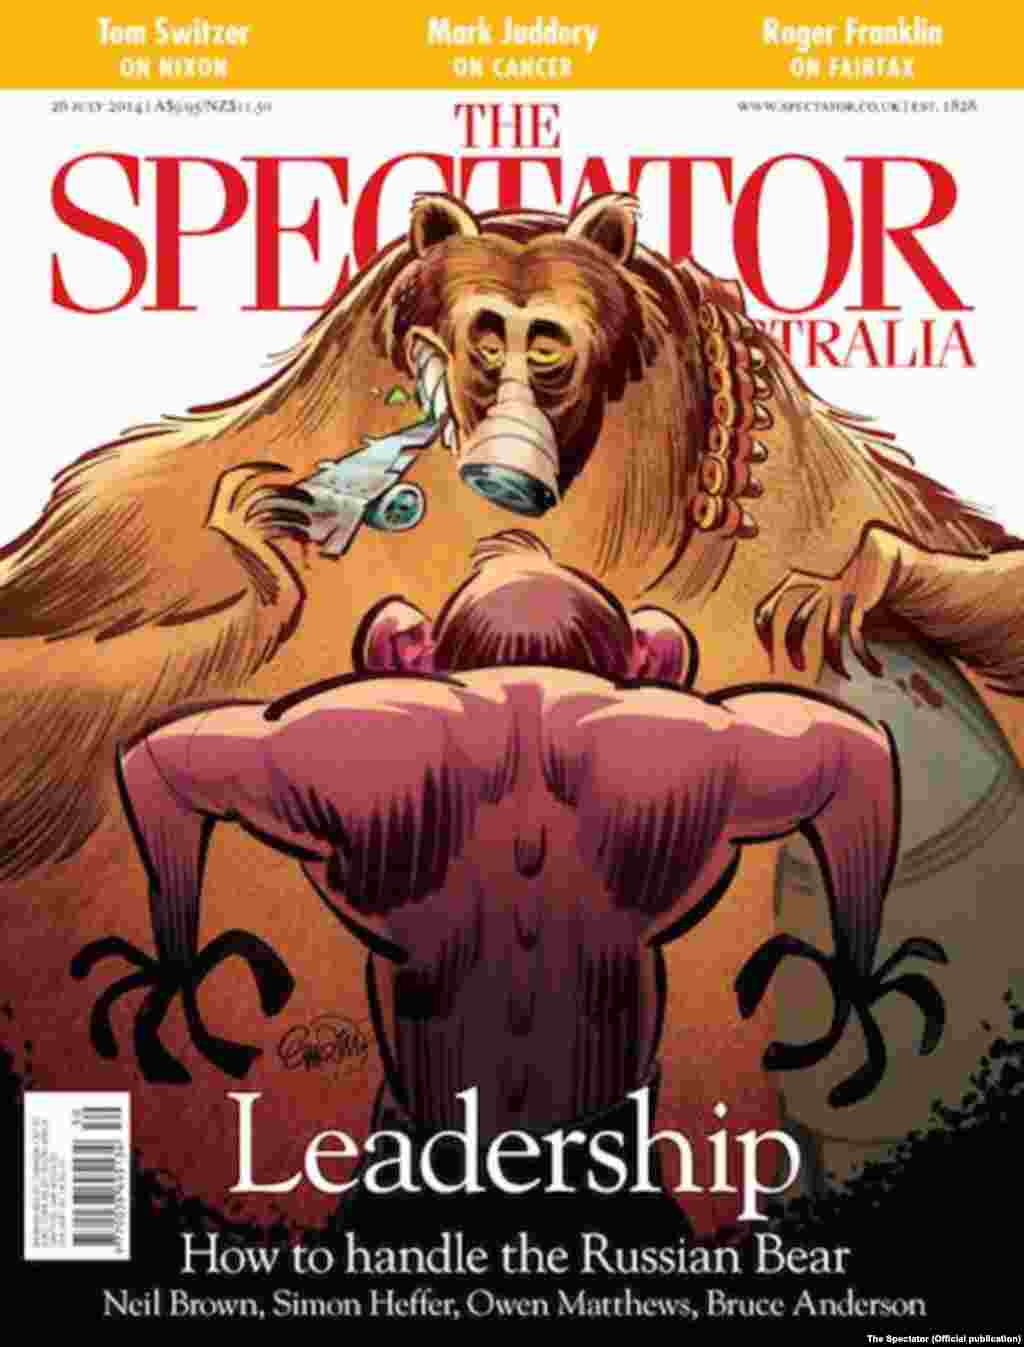 Australia&#39;s &quot;The Spectator,&quot; dated July 26, pictures Russia as an armed bear gobbling up an airplane.